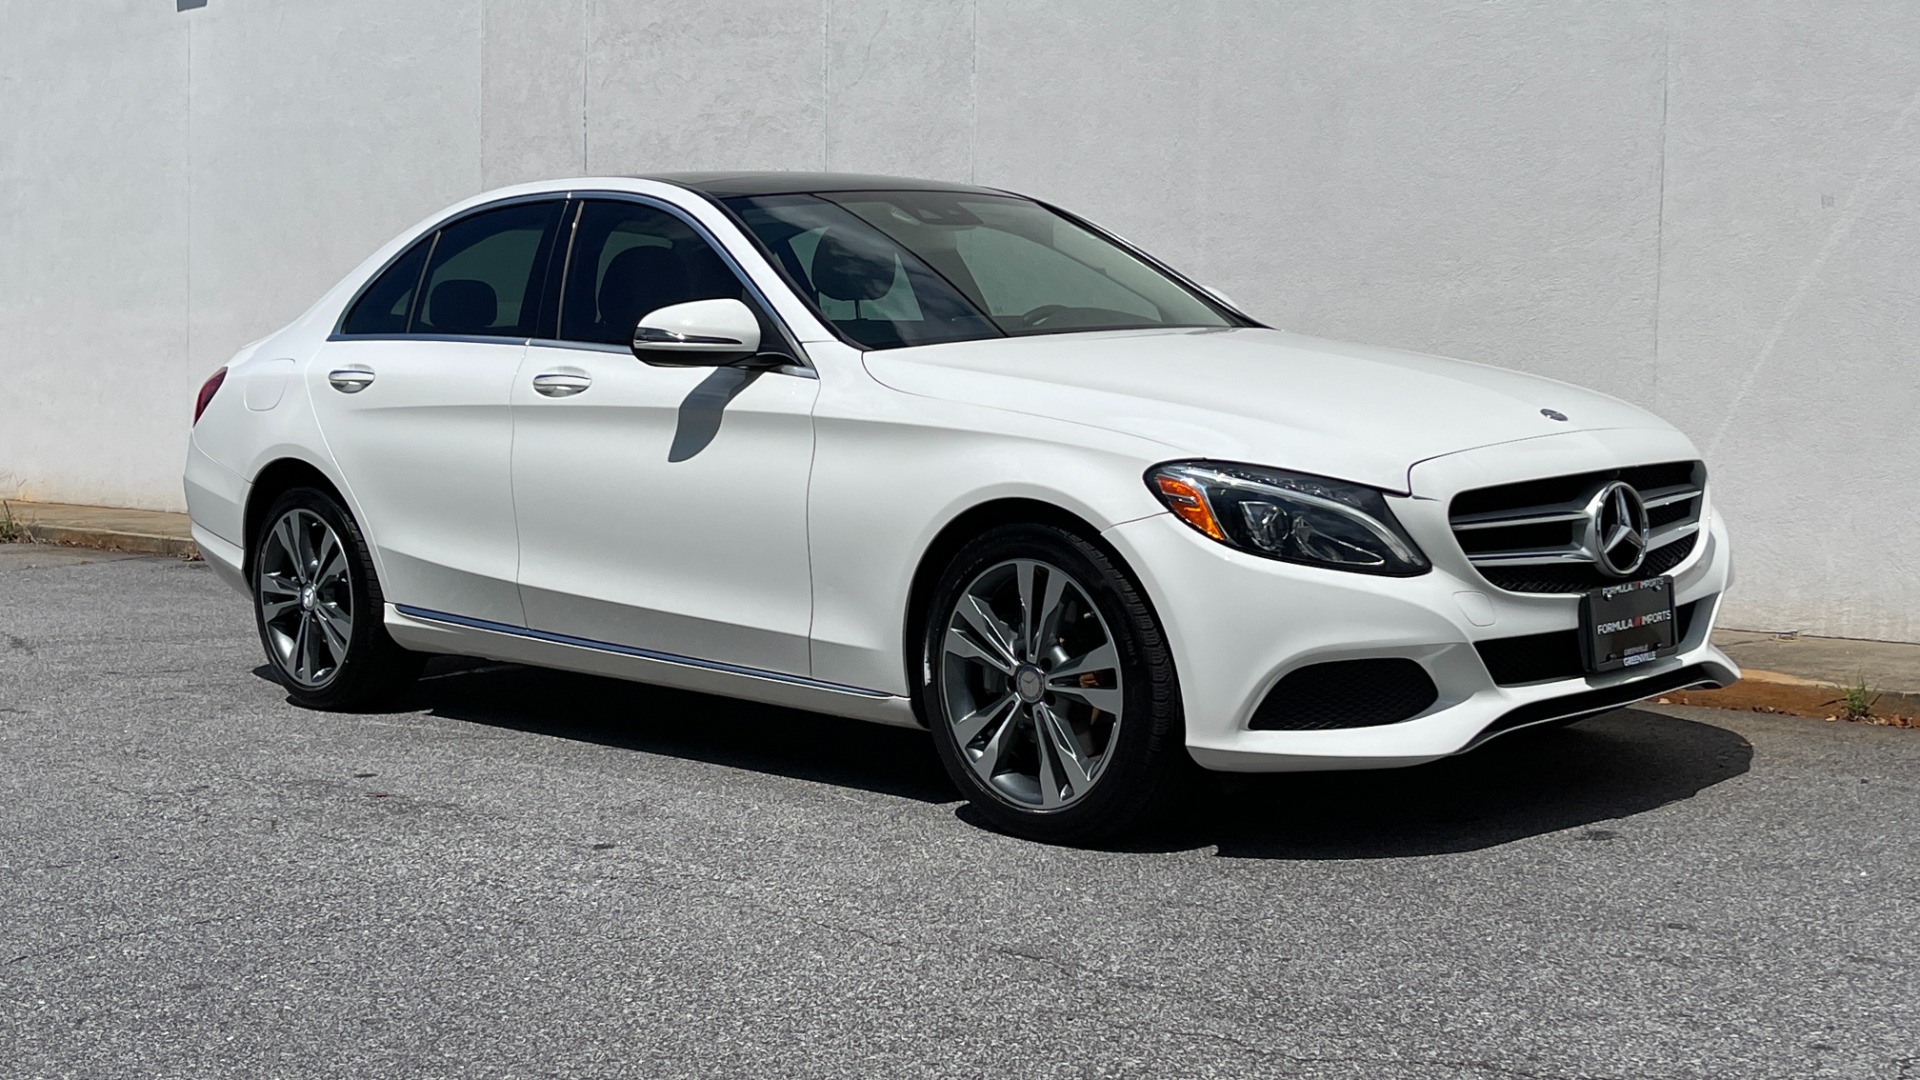 Used 2016 Mercedes-Benz C-Class C300 / 4MATIC / PREMIUM / LINDEN WOOD / ILLUMINATED STAR / MULTIMEDIA for sale $25,995 at Formula Imports in Charlotte NC 28227 6